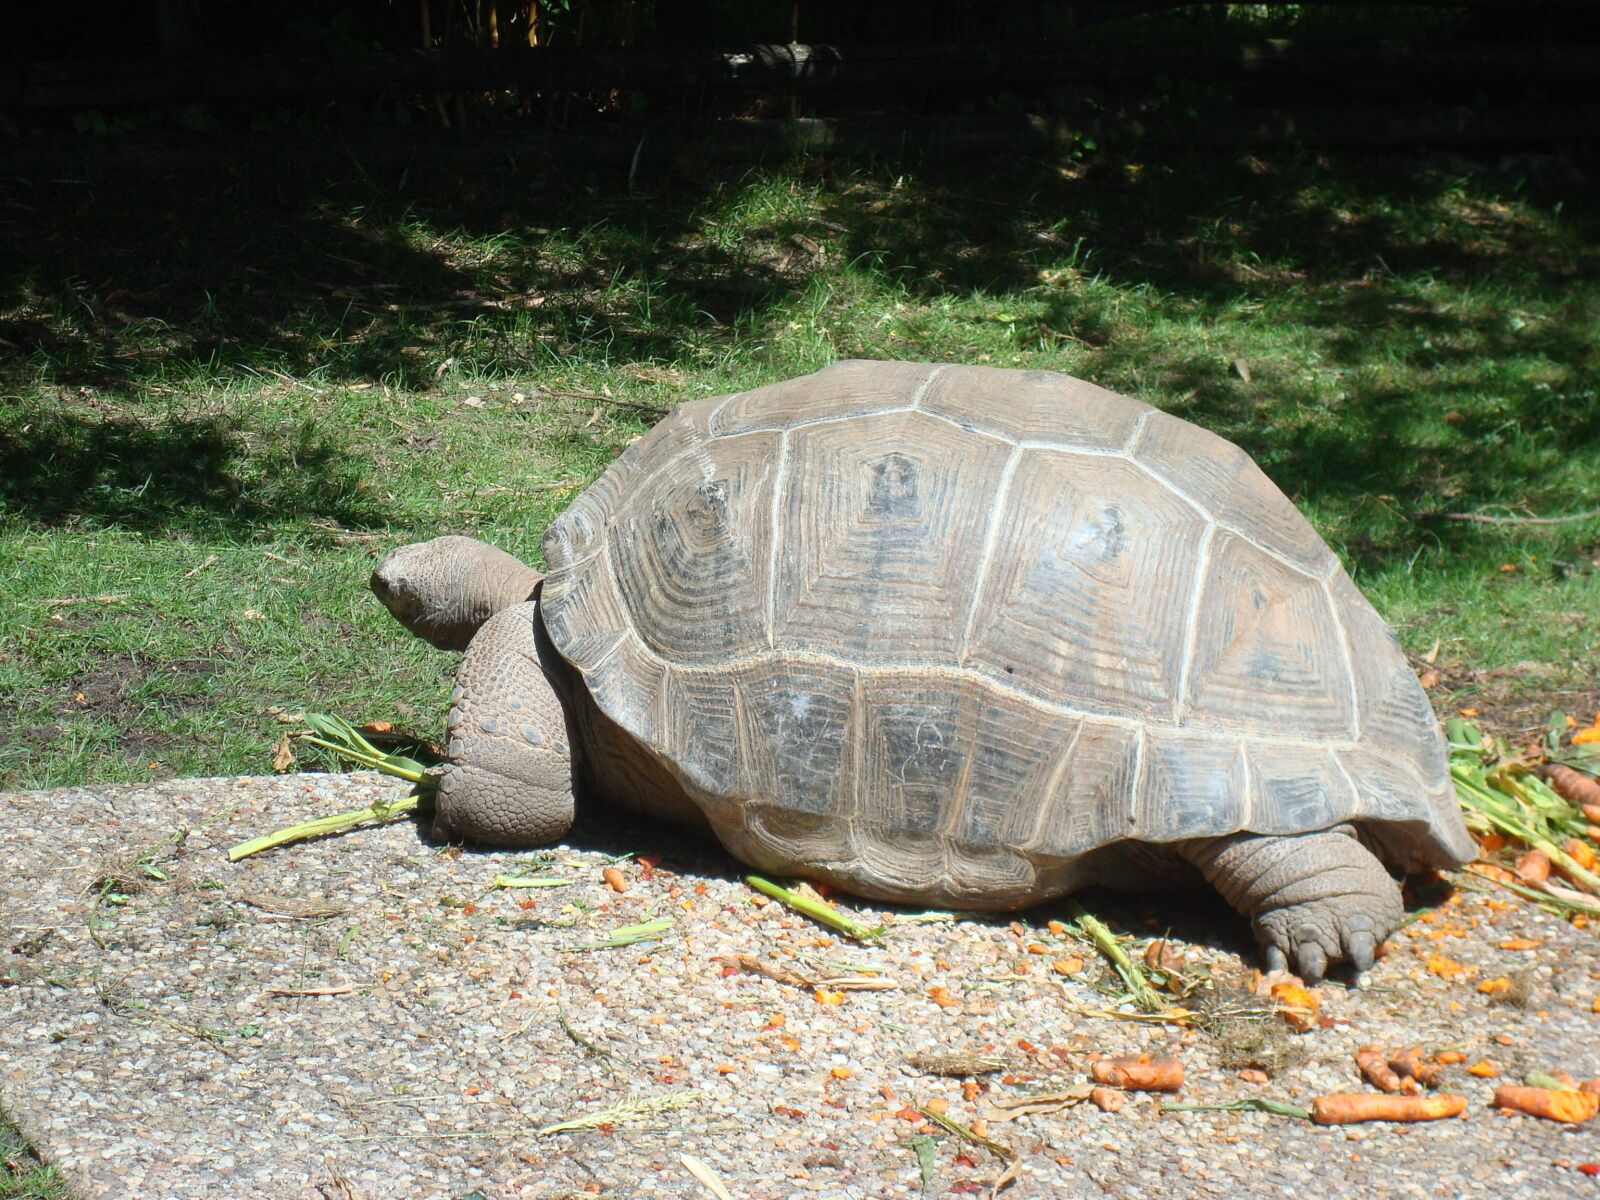 Sony DSC-W85 sample photo. "Turtle, animal, carapace" photography